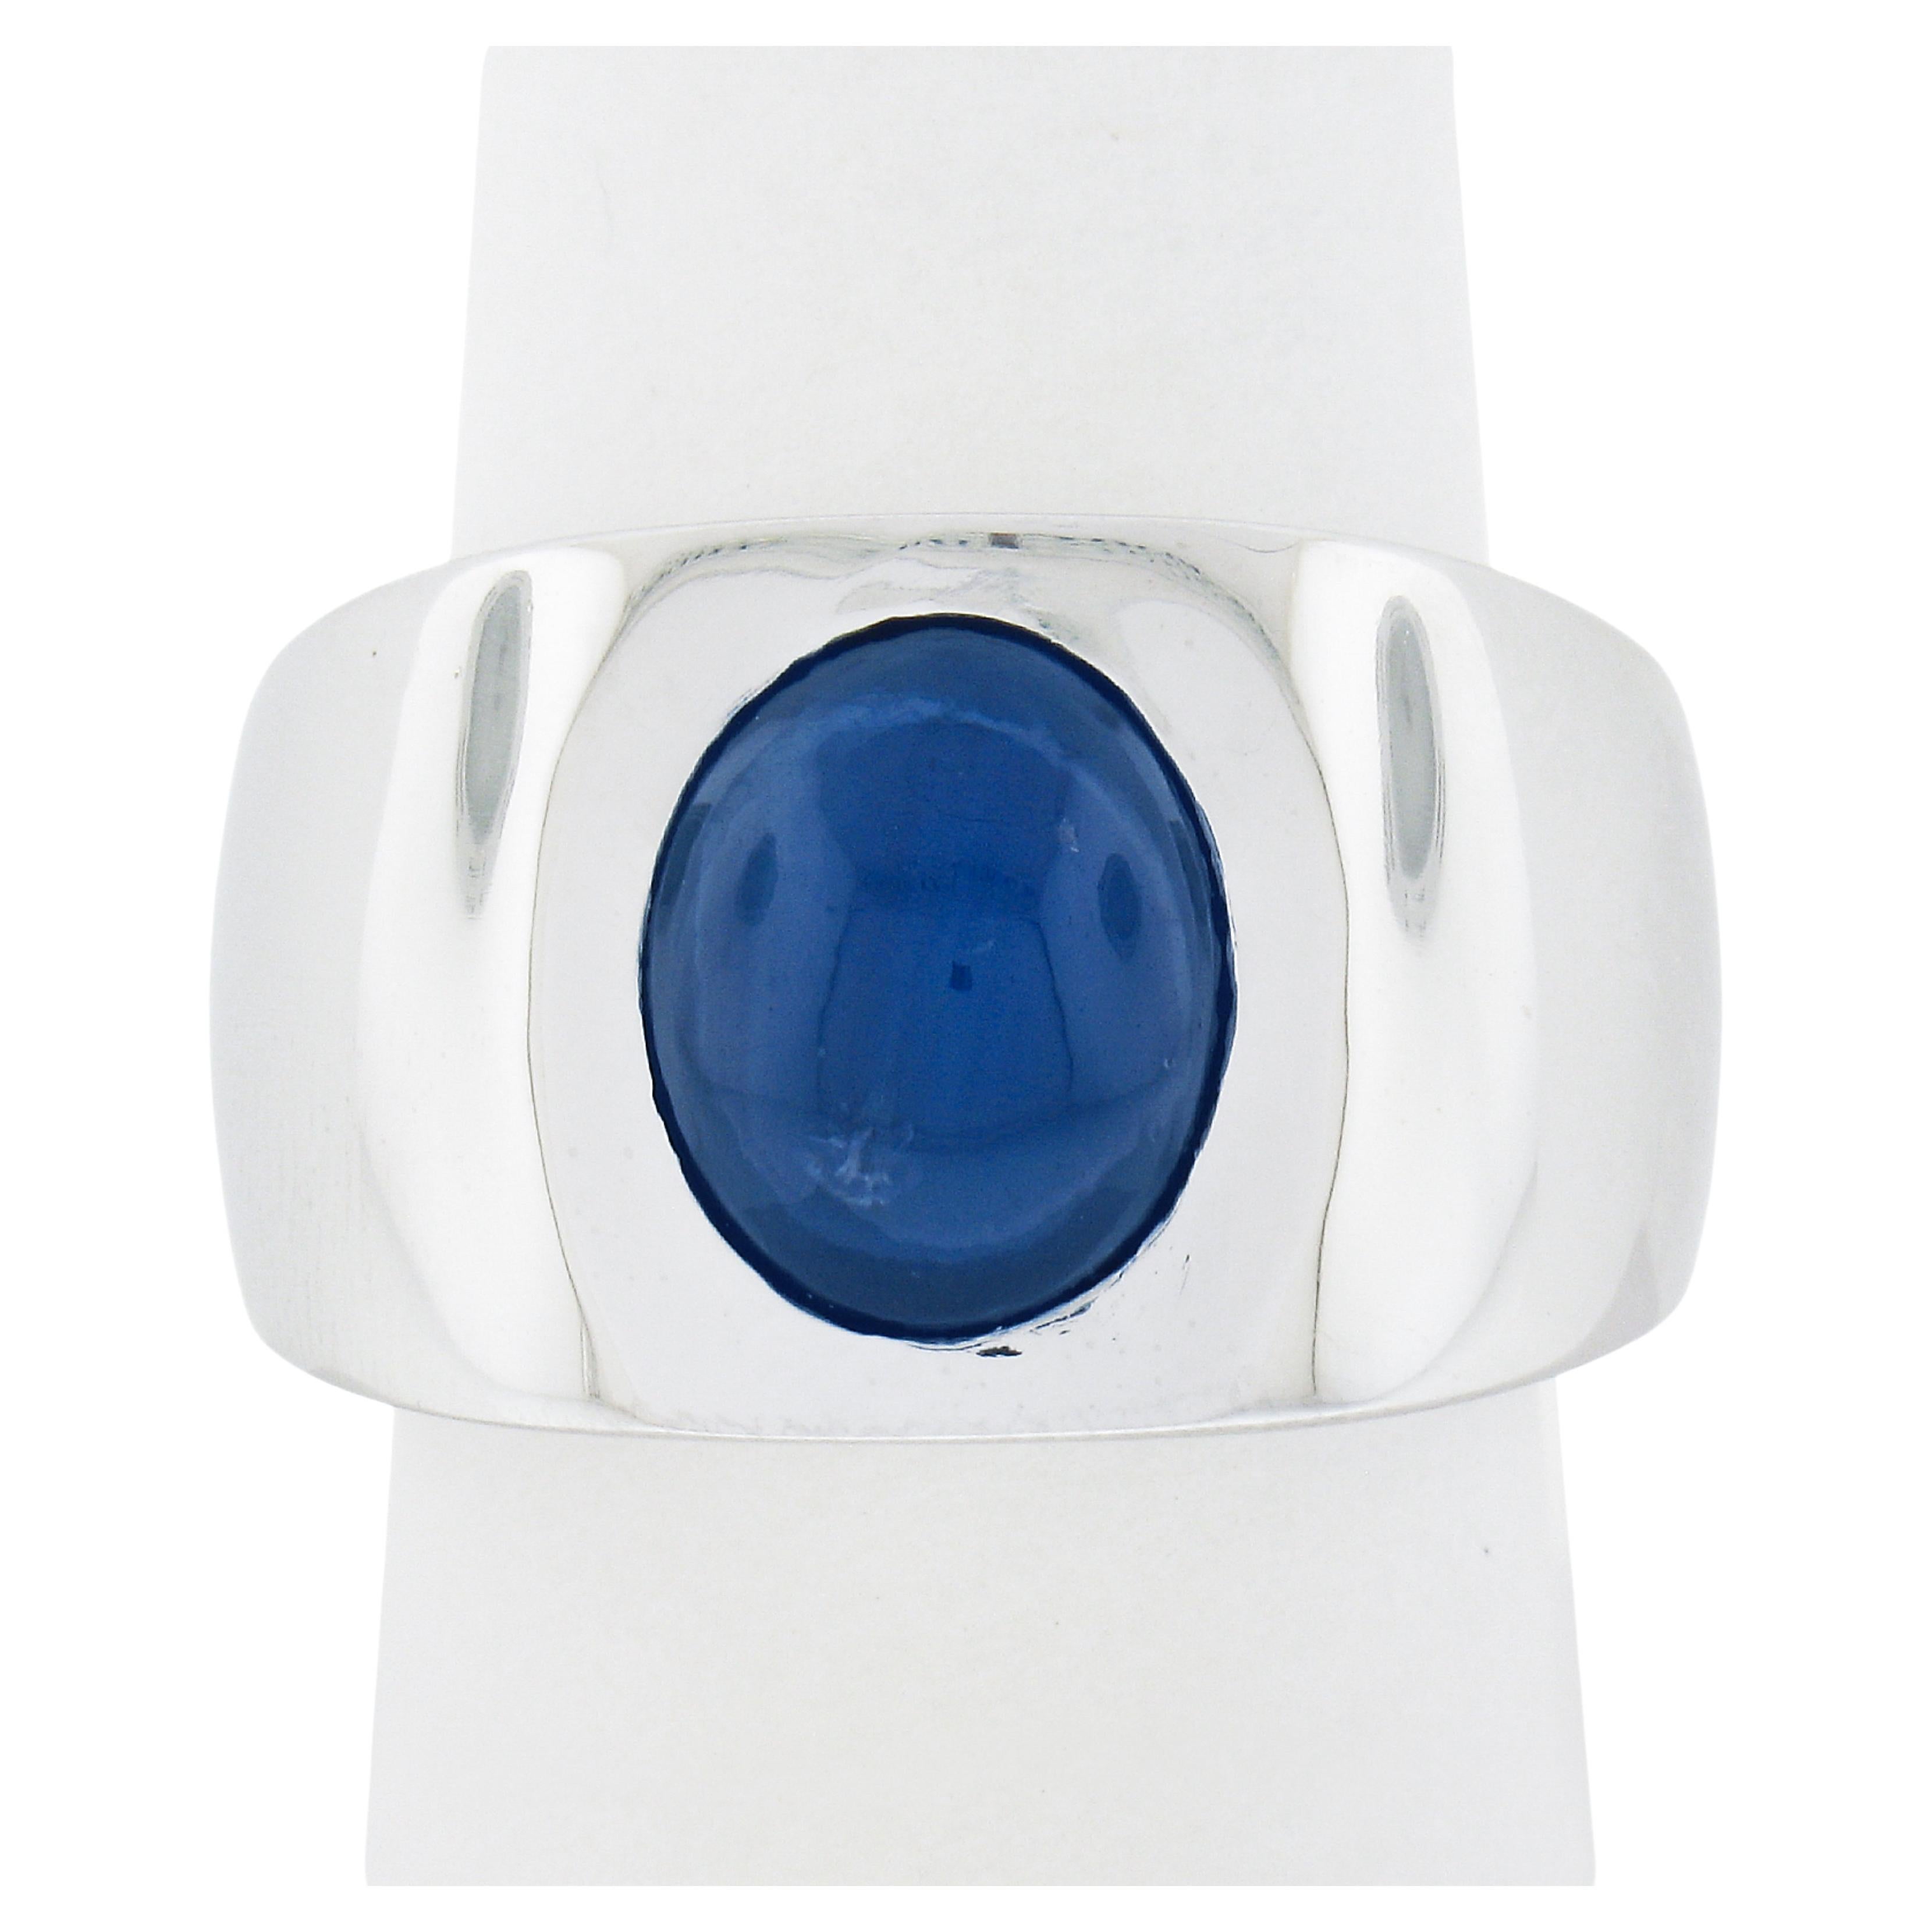 This gorgeous and very well made ring is newly crafted in solid platinum and features a magnificent, Gubelin certified, natural sapphire stone perfectly bezel set at its center. The oval cabochon cut sapphire is certified as weighing exactly 9.01